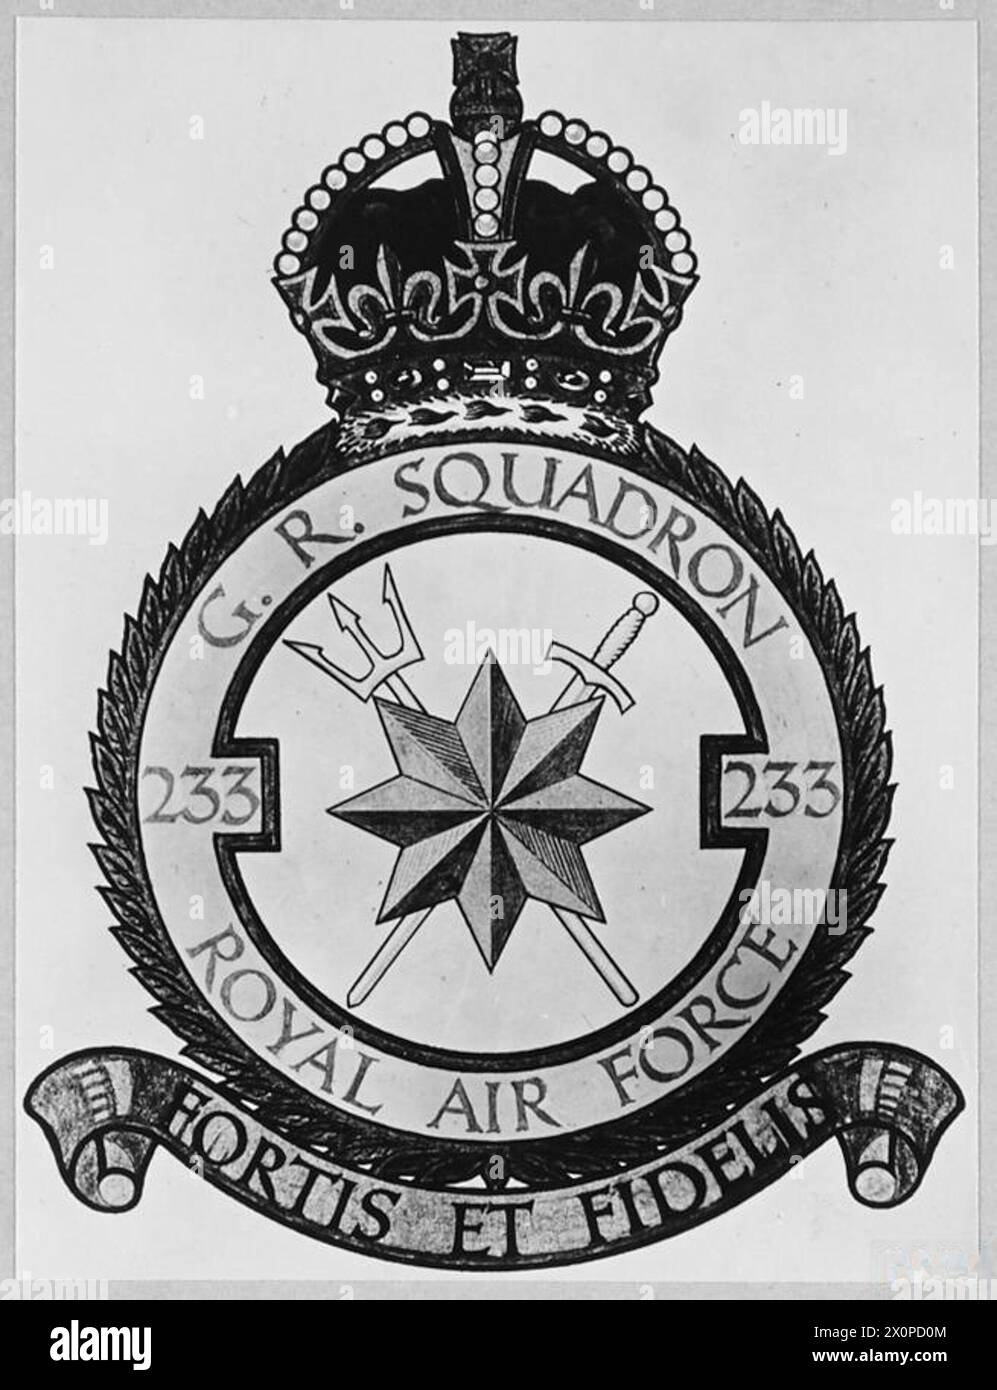 R.A.F. SQUADRON AND R.A.F. STATION BADGES - The badge of No.233 G.R. Squadron, R.A.F. 'FORTIS ET FIDELIS' [Strong and Faithful] Photographic negative , Royal Air Force Stock Photo